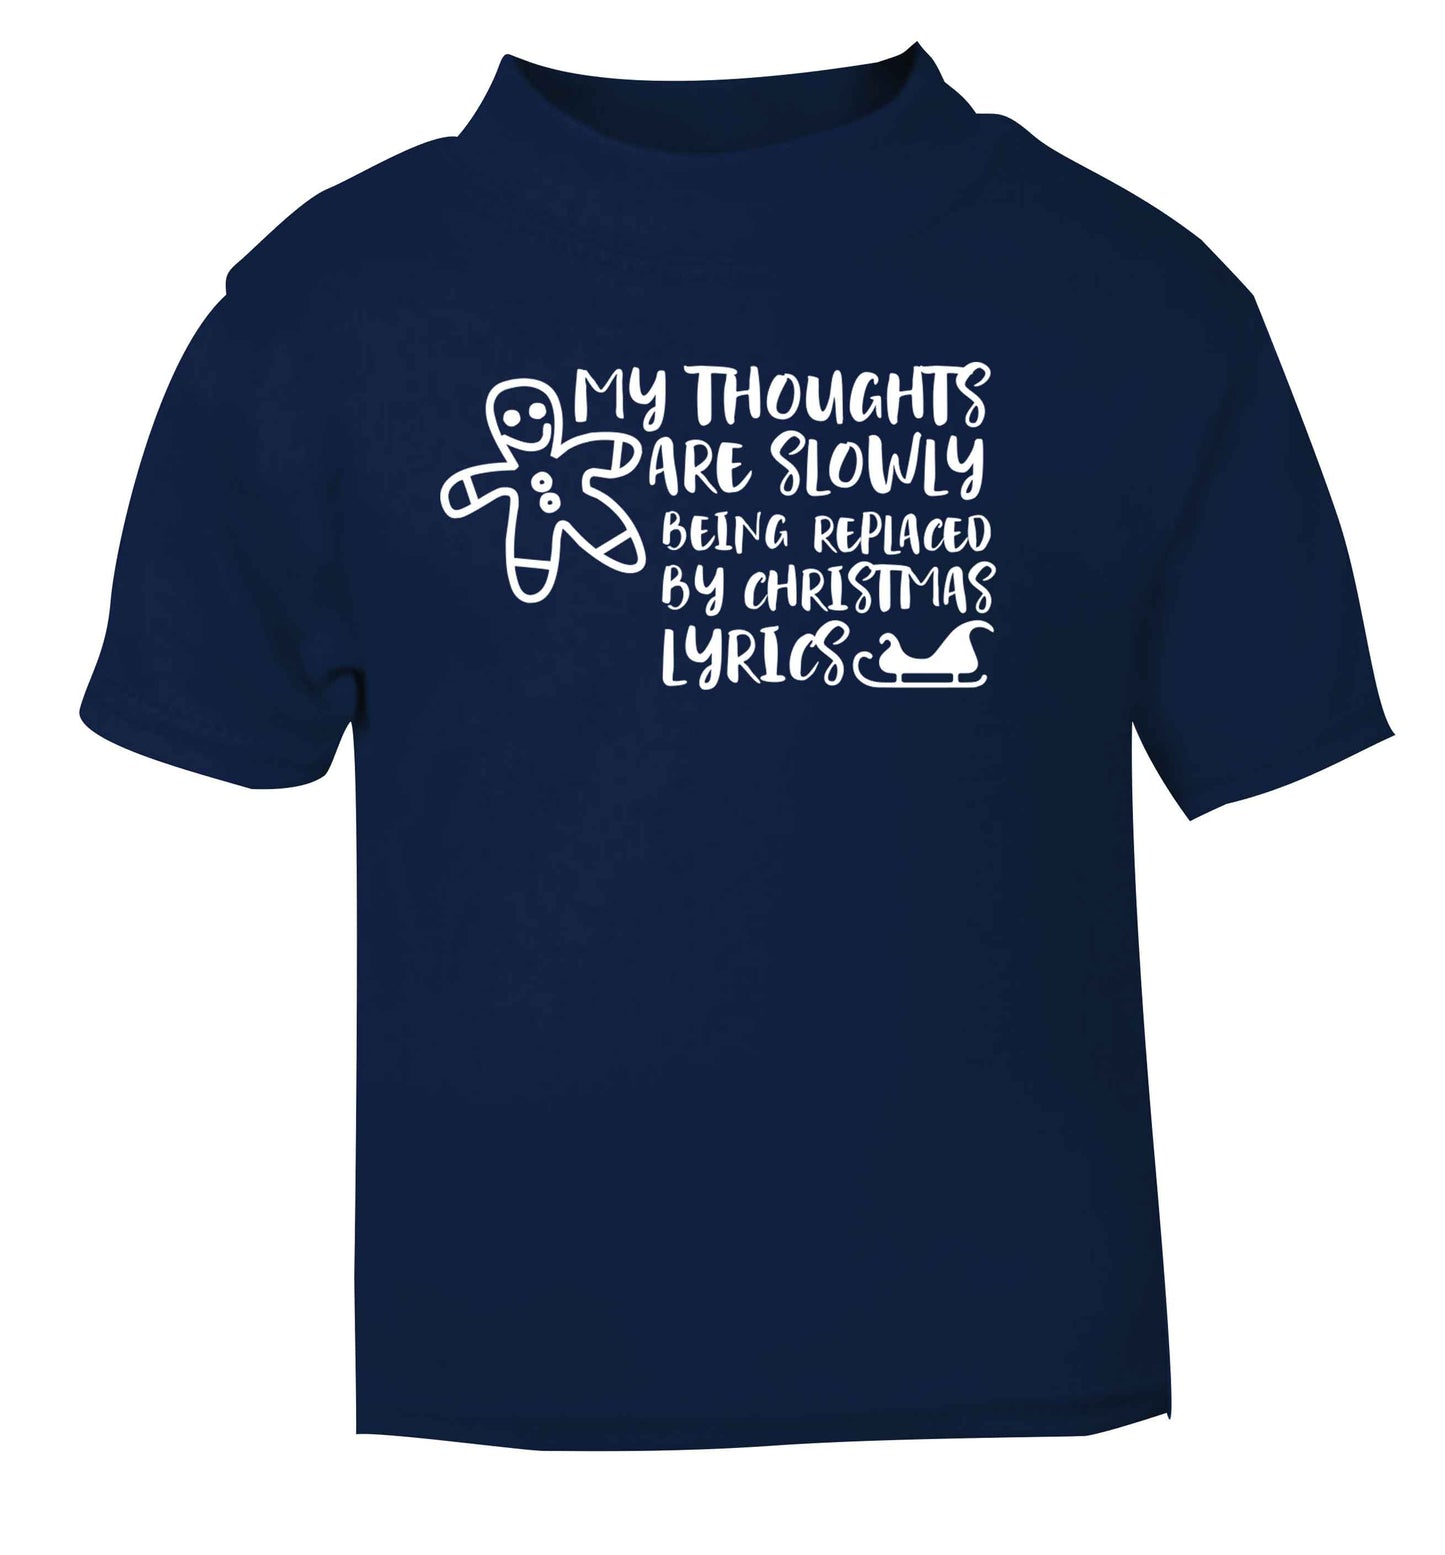 My thoughts are slowly being replaced by Christmas lyrics navy Baby Toddler Tshirt 2 Years